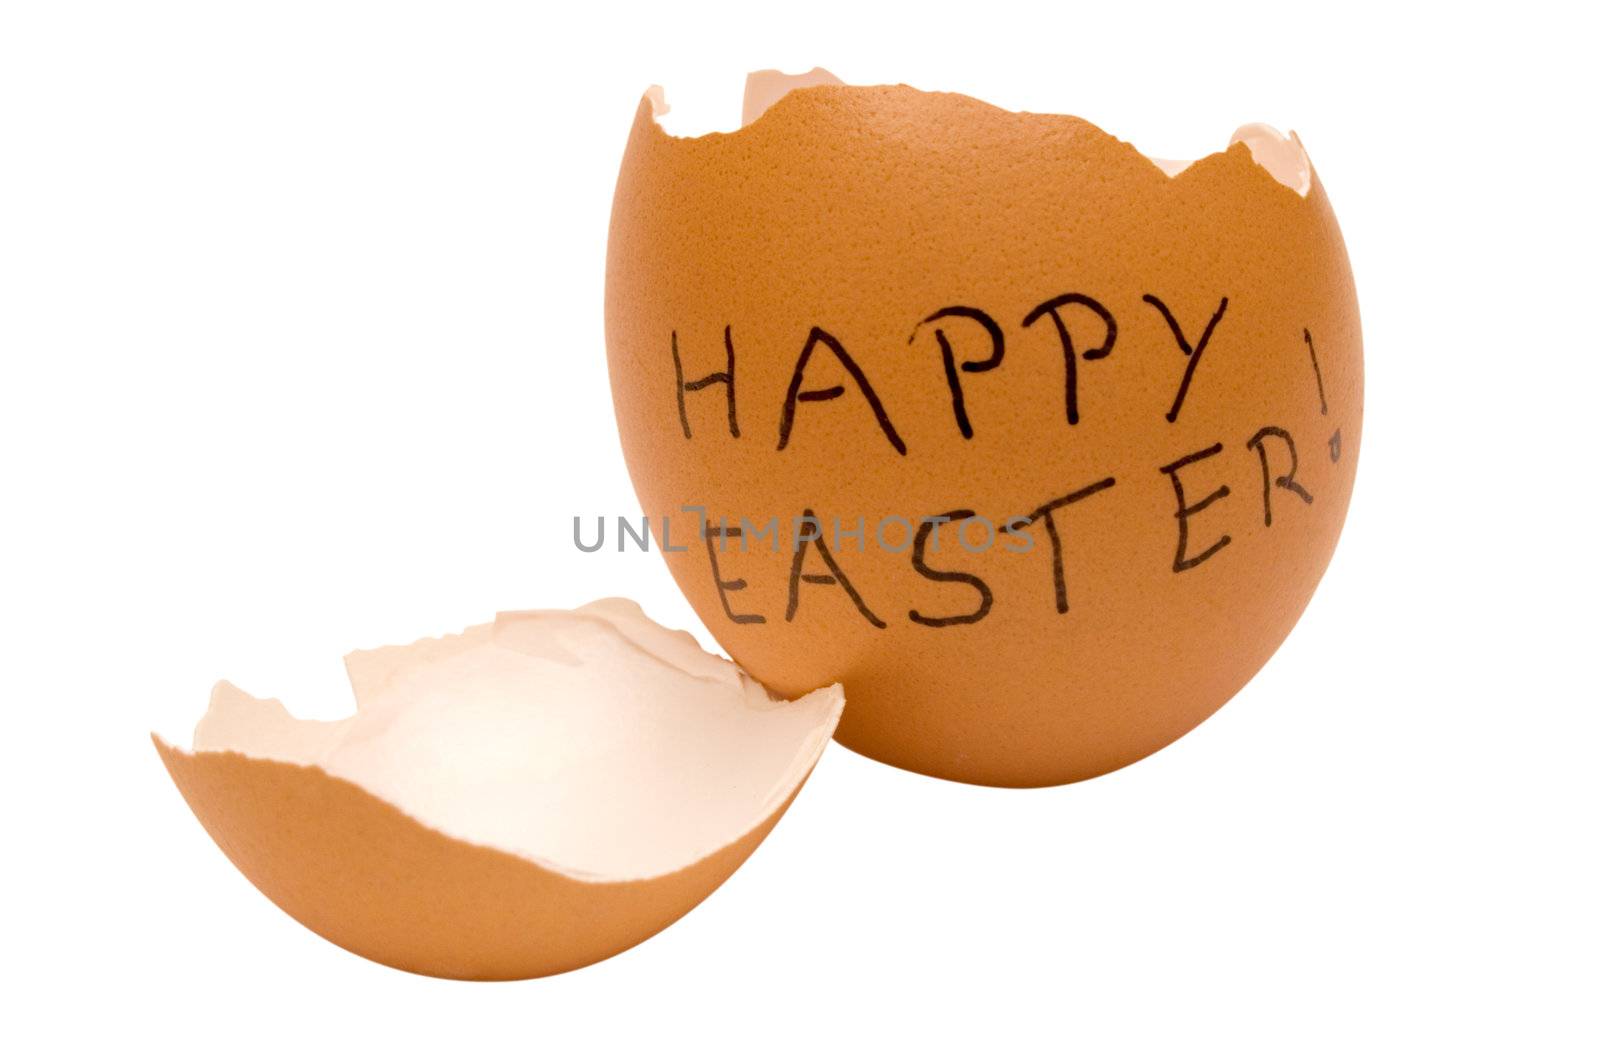 Happy Easter written on a brown egg. Isolated on a white background. File contains clipping path.